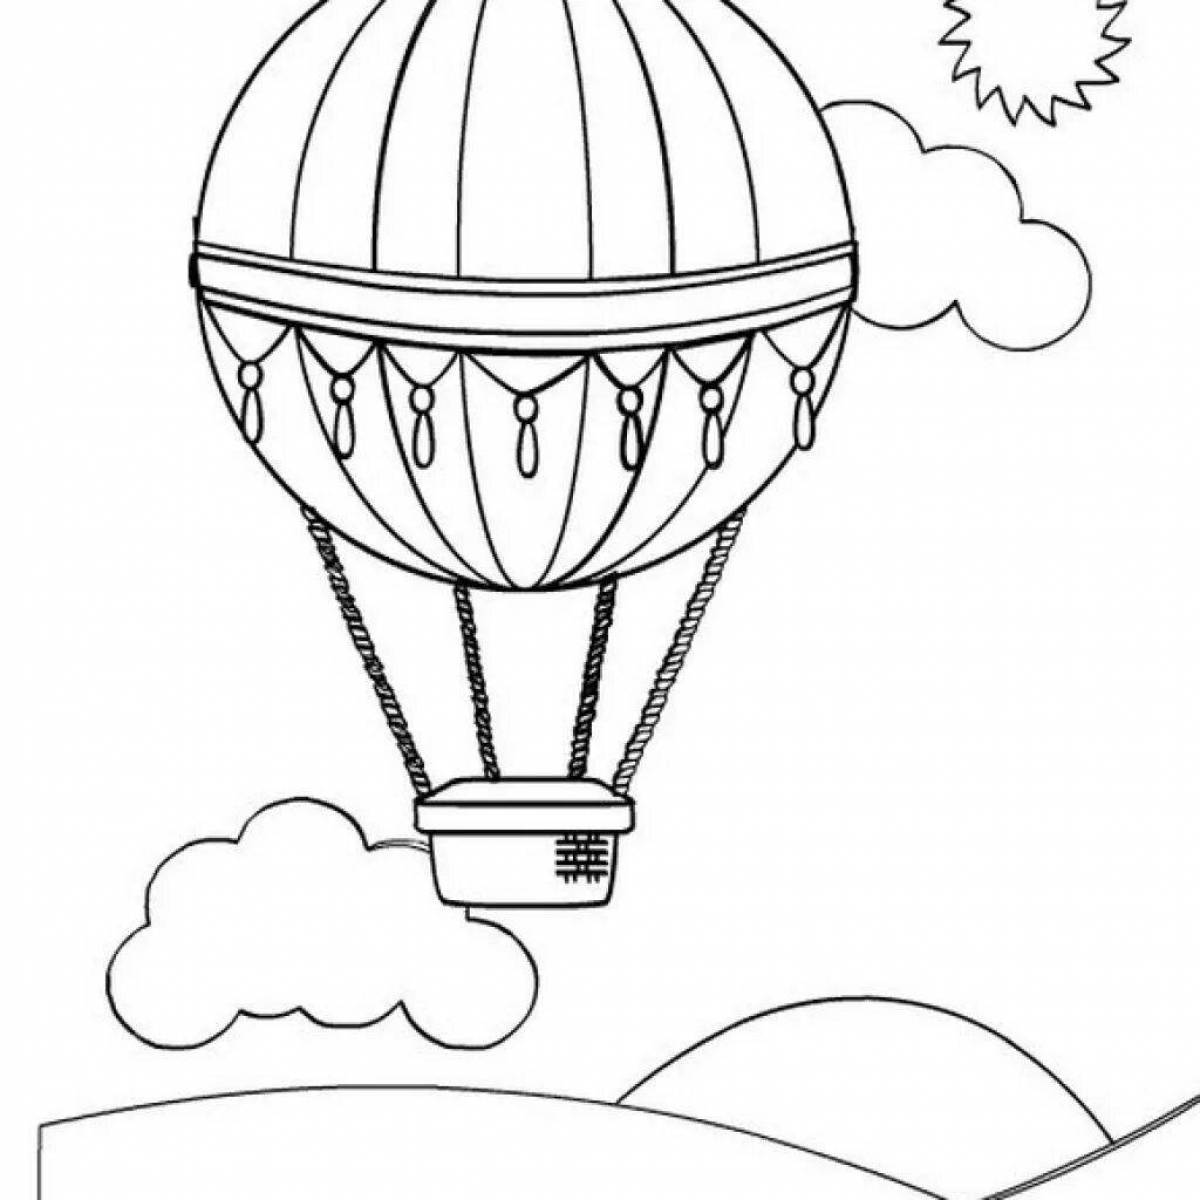 Outstanding airship coloring book for kids